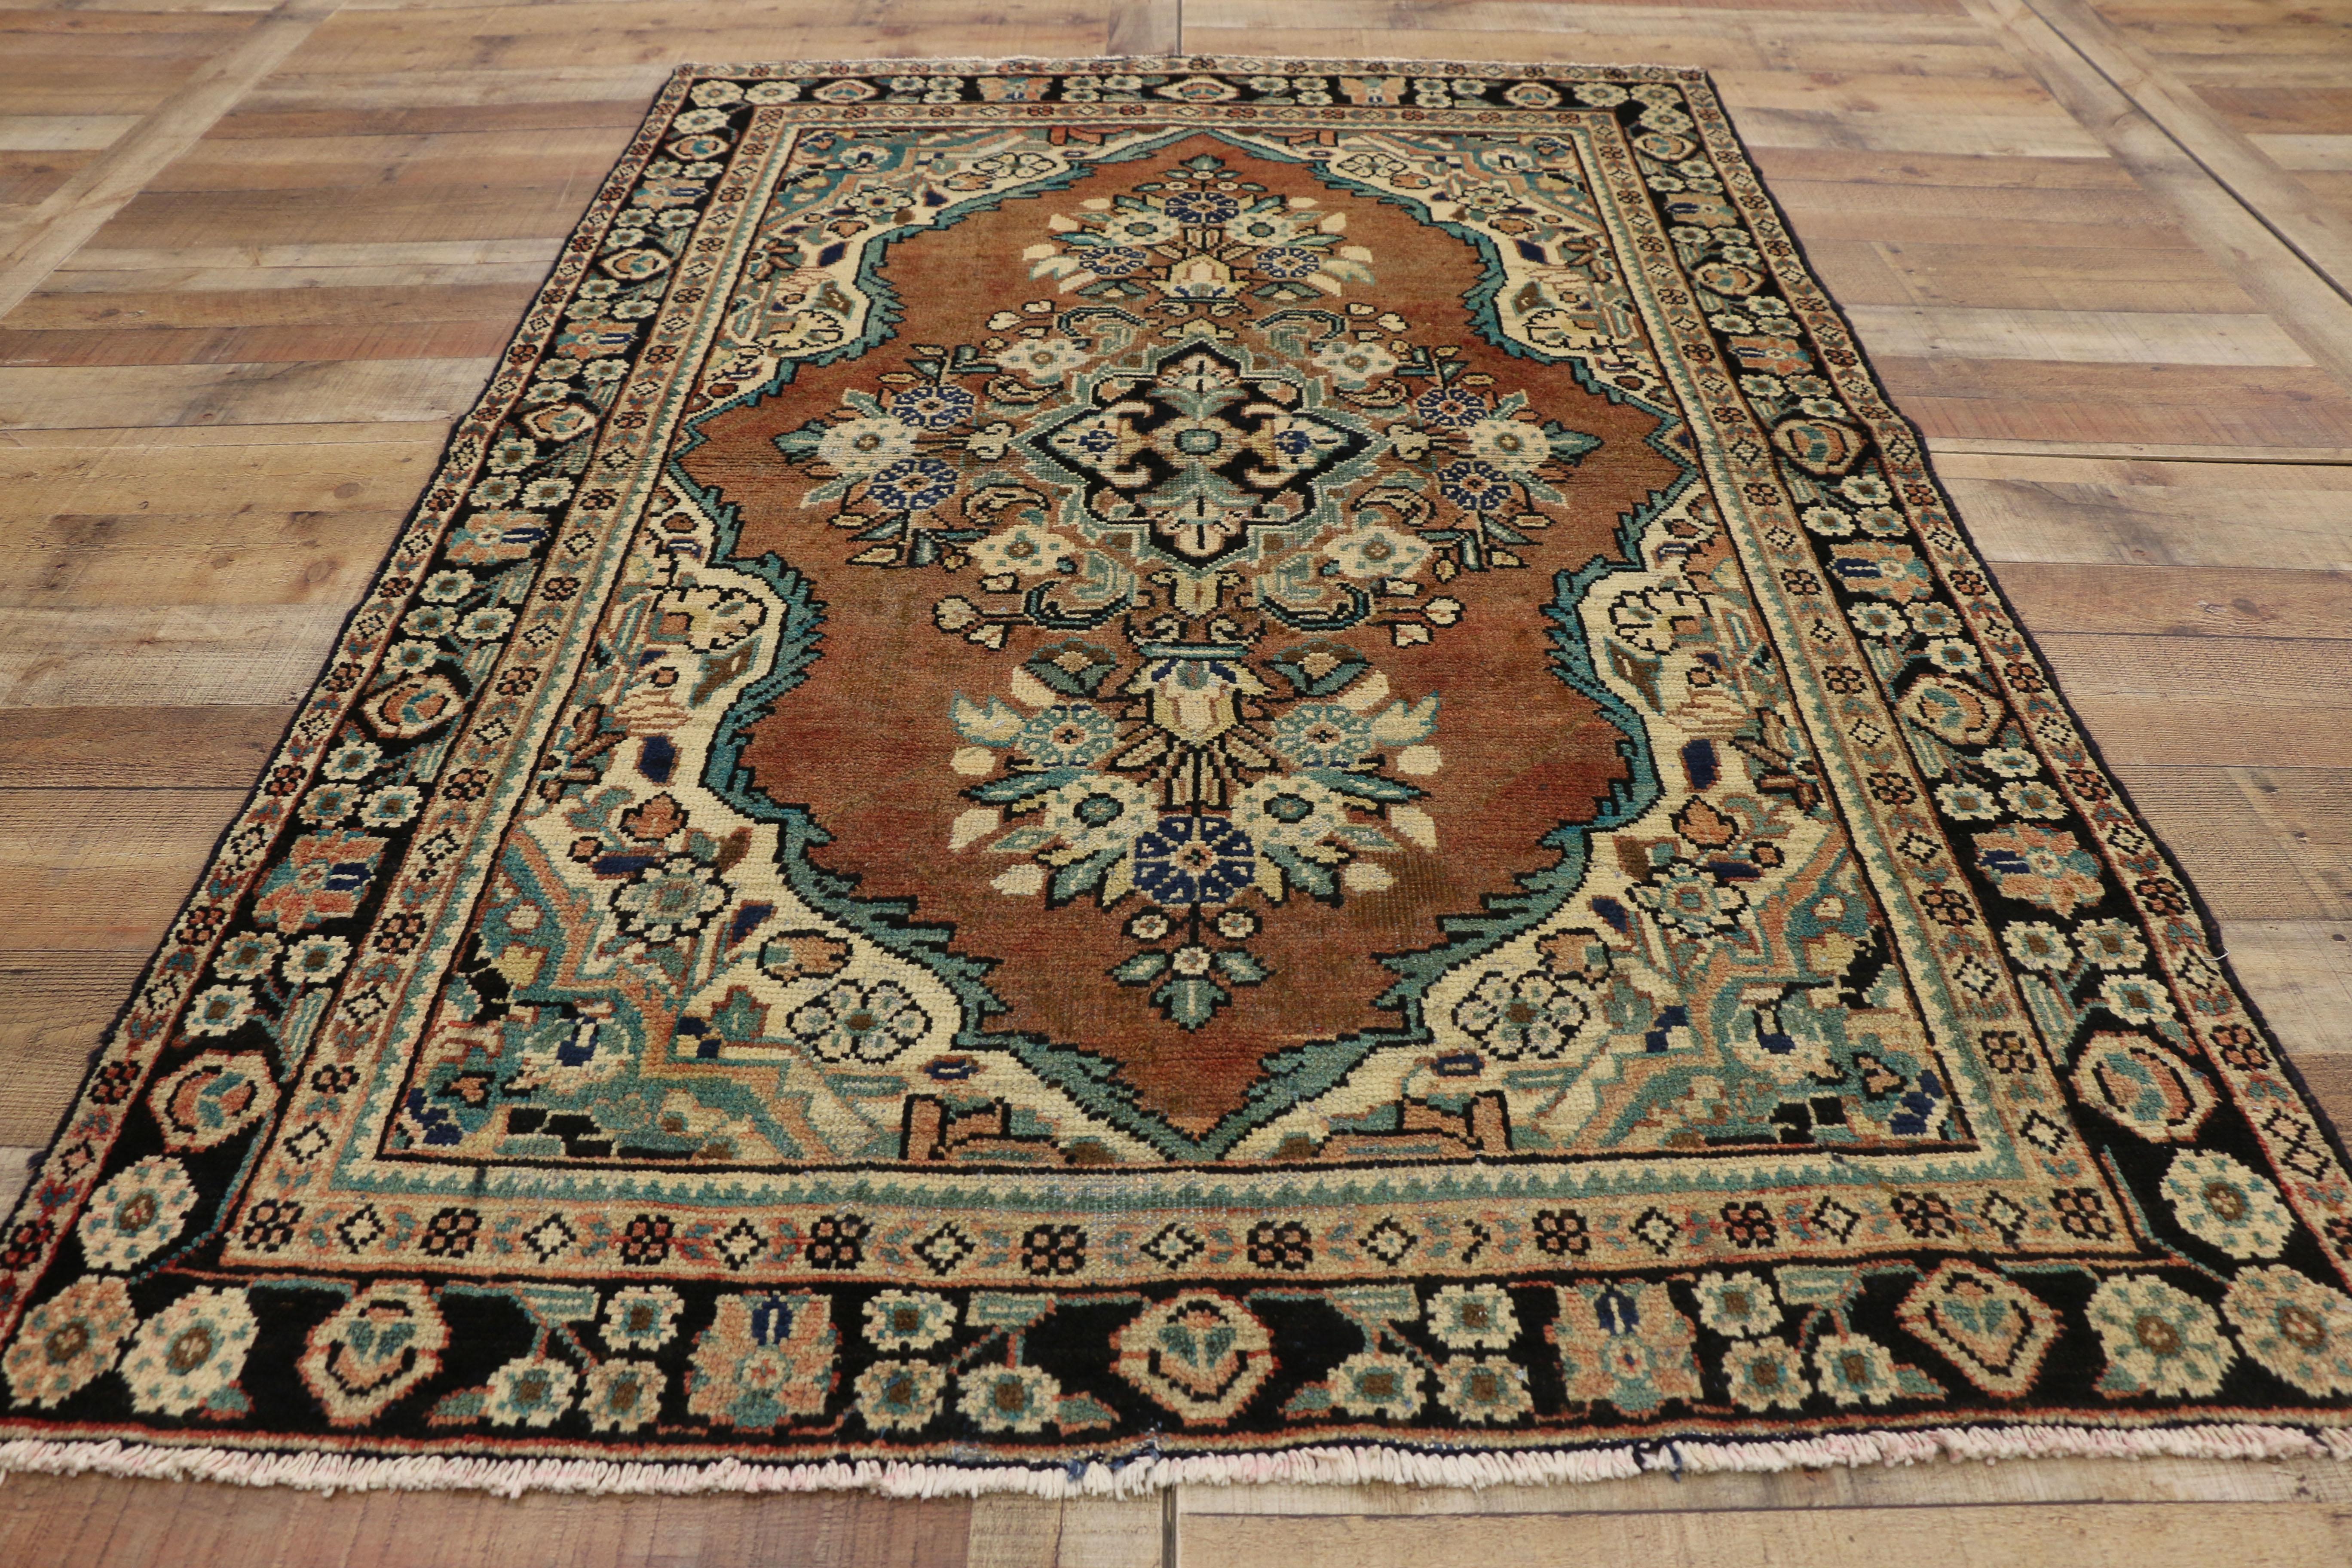 Vintage Persian Mahal Rug with Rustic English Country Cottage Style In Good Condition For Sale In Dallas, TX